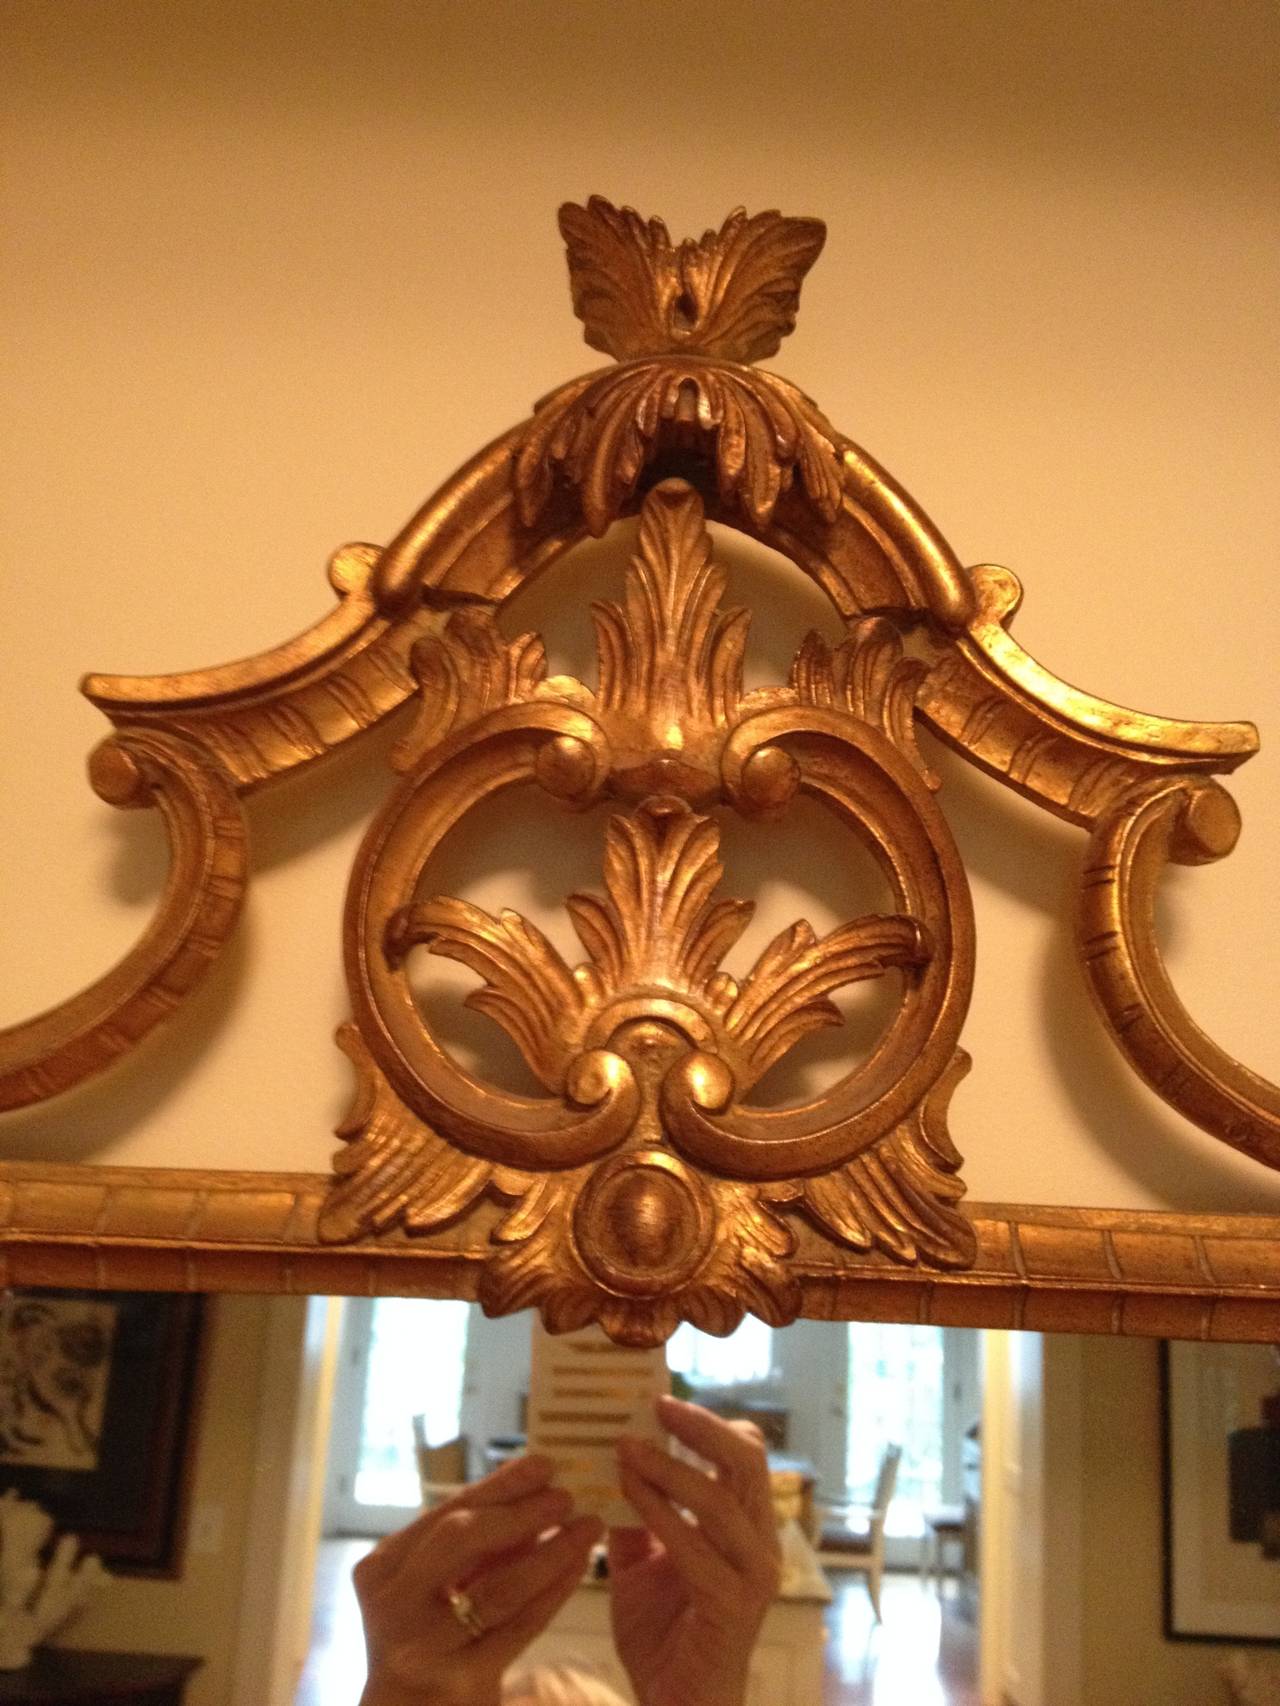 A vintage chippendale gilt wood mirror by Carvers' Guild